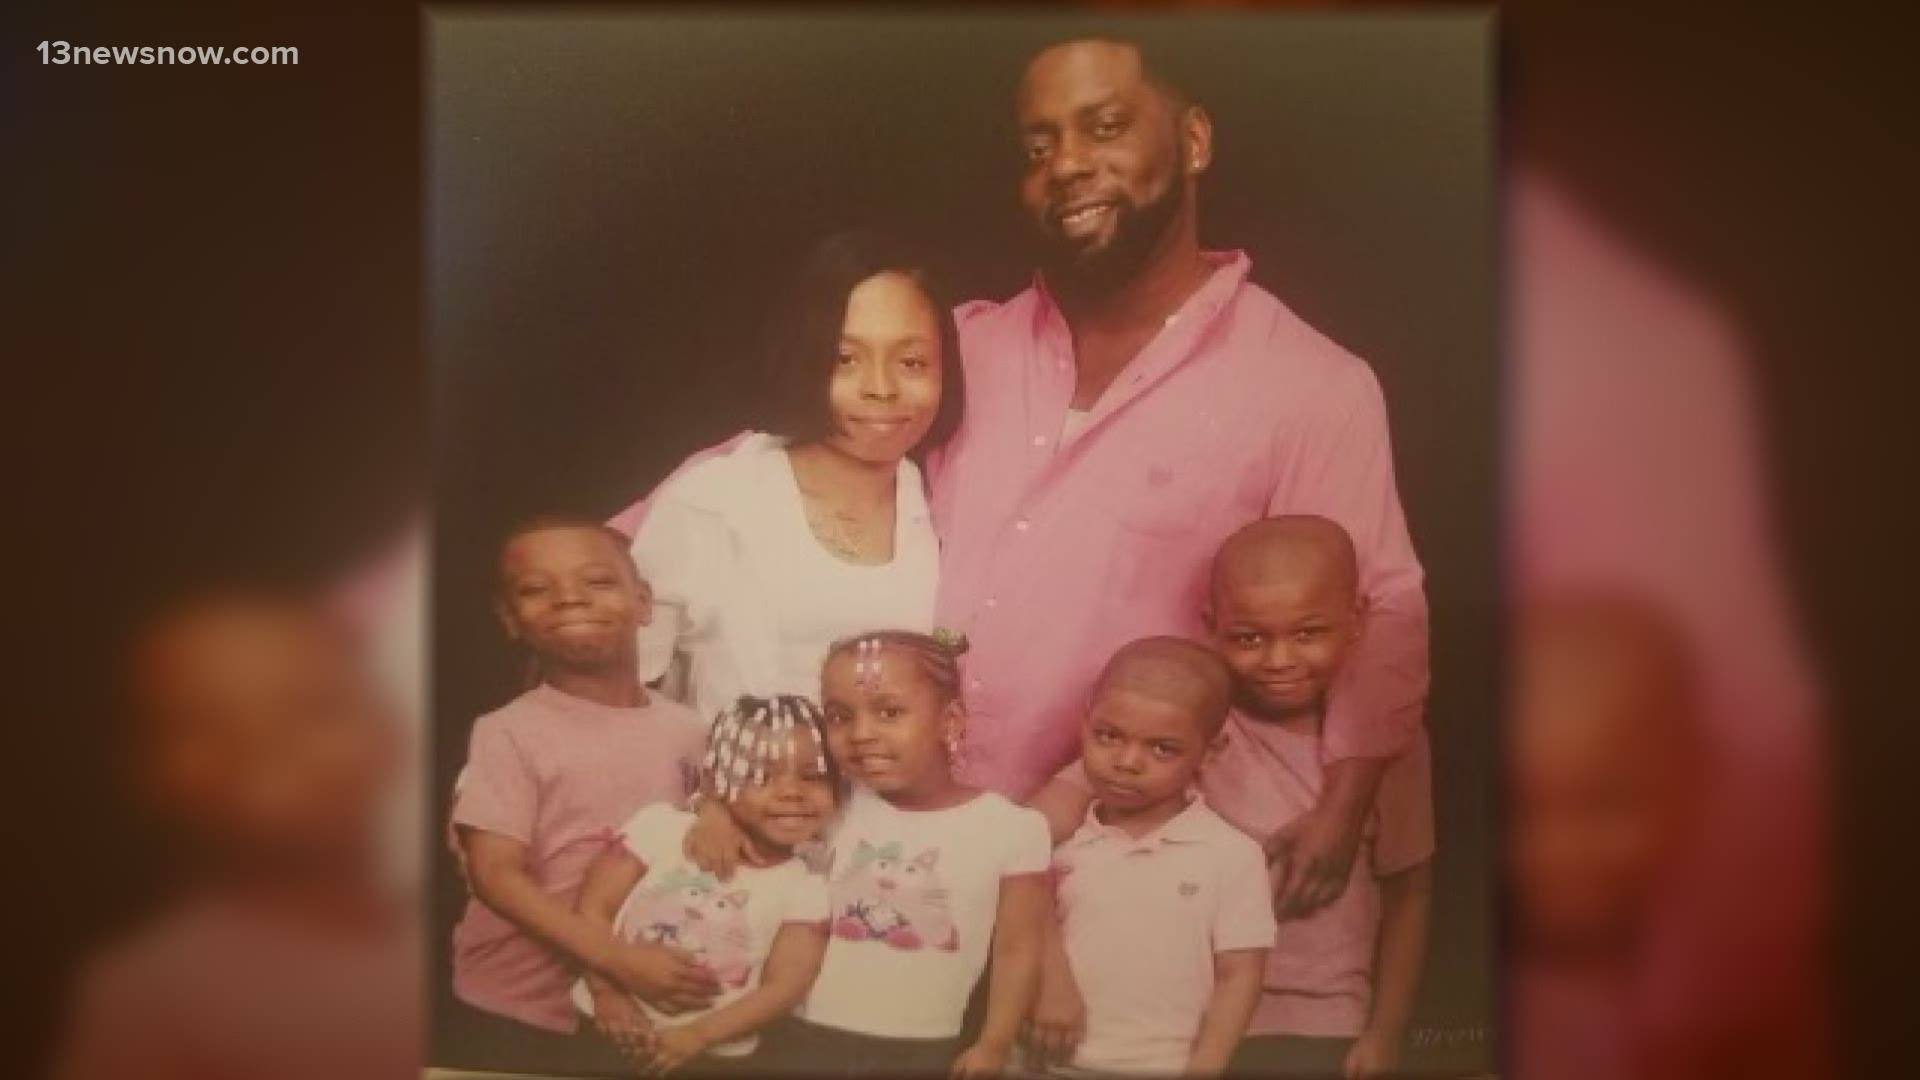 The family of the man shot and killed by Pasquotank County Sheriff's deputies is demanding answers.